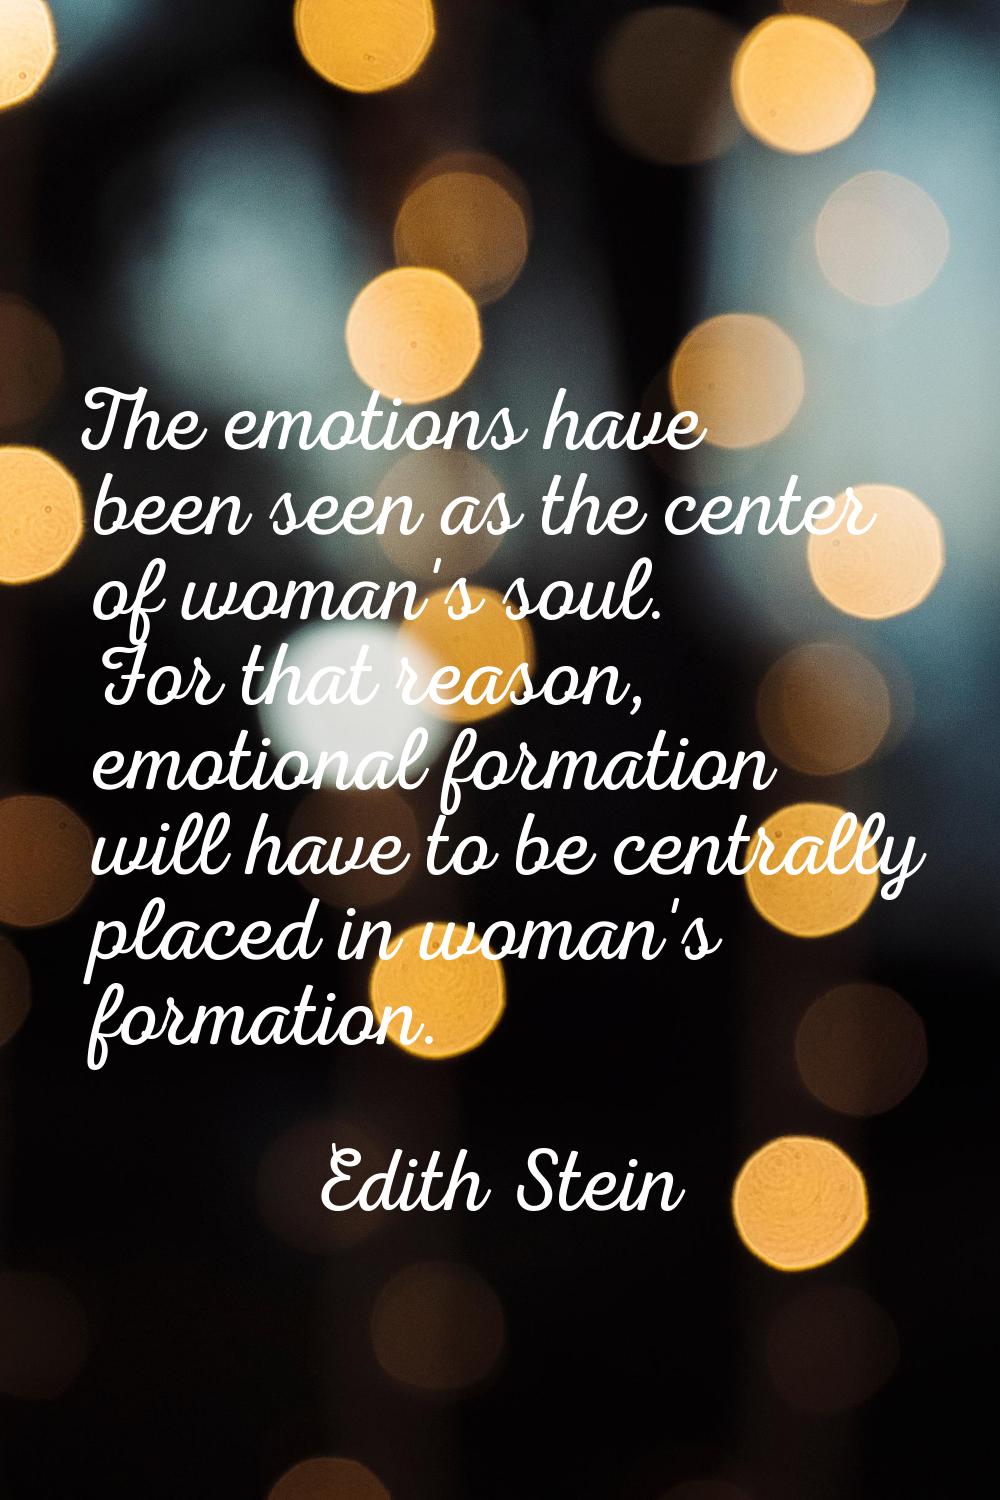 The emotions have been seen as the center of woman's soul. For that reason, emotional formation wil